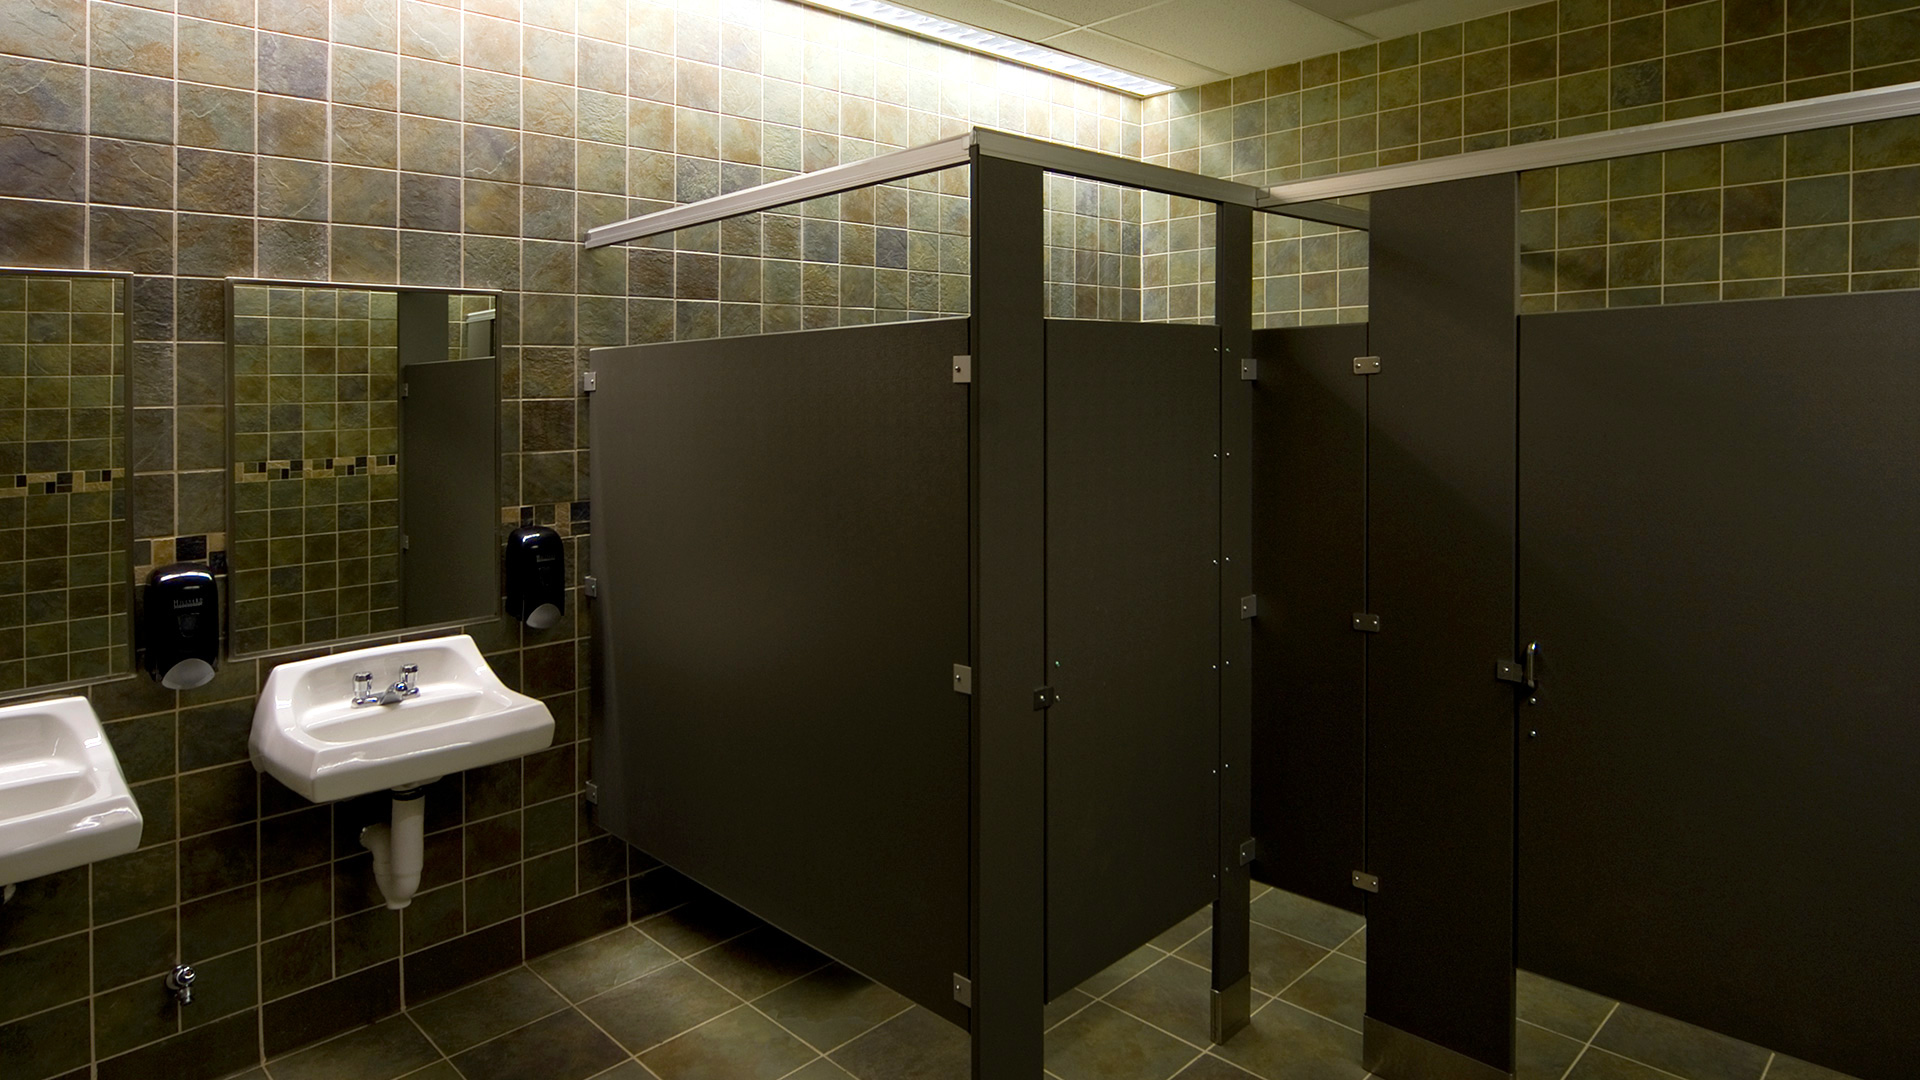 Restroom interior, with black divider walls and gray tile walls and floor.